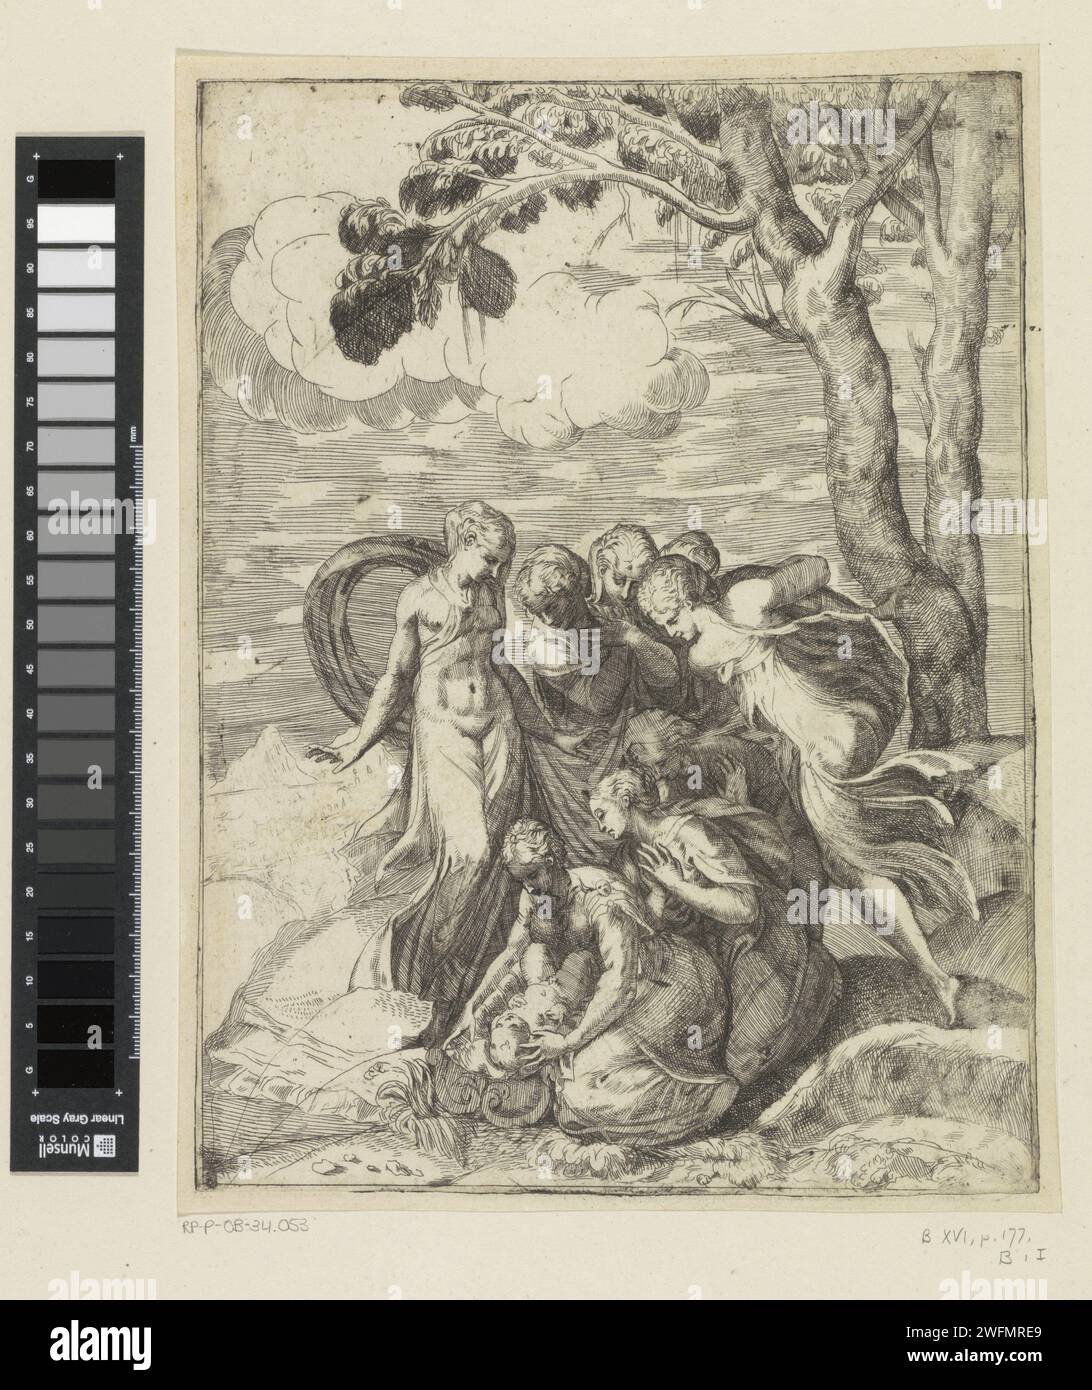 Moses Saved from the Nile, Battista Angolo del Moro, 1524 - 1575 print Moses is saved from the Nile by a group of six women. Italy paper etching Moses is pulled out of the water by the servants Stock Photo